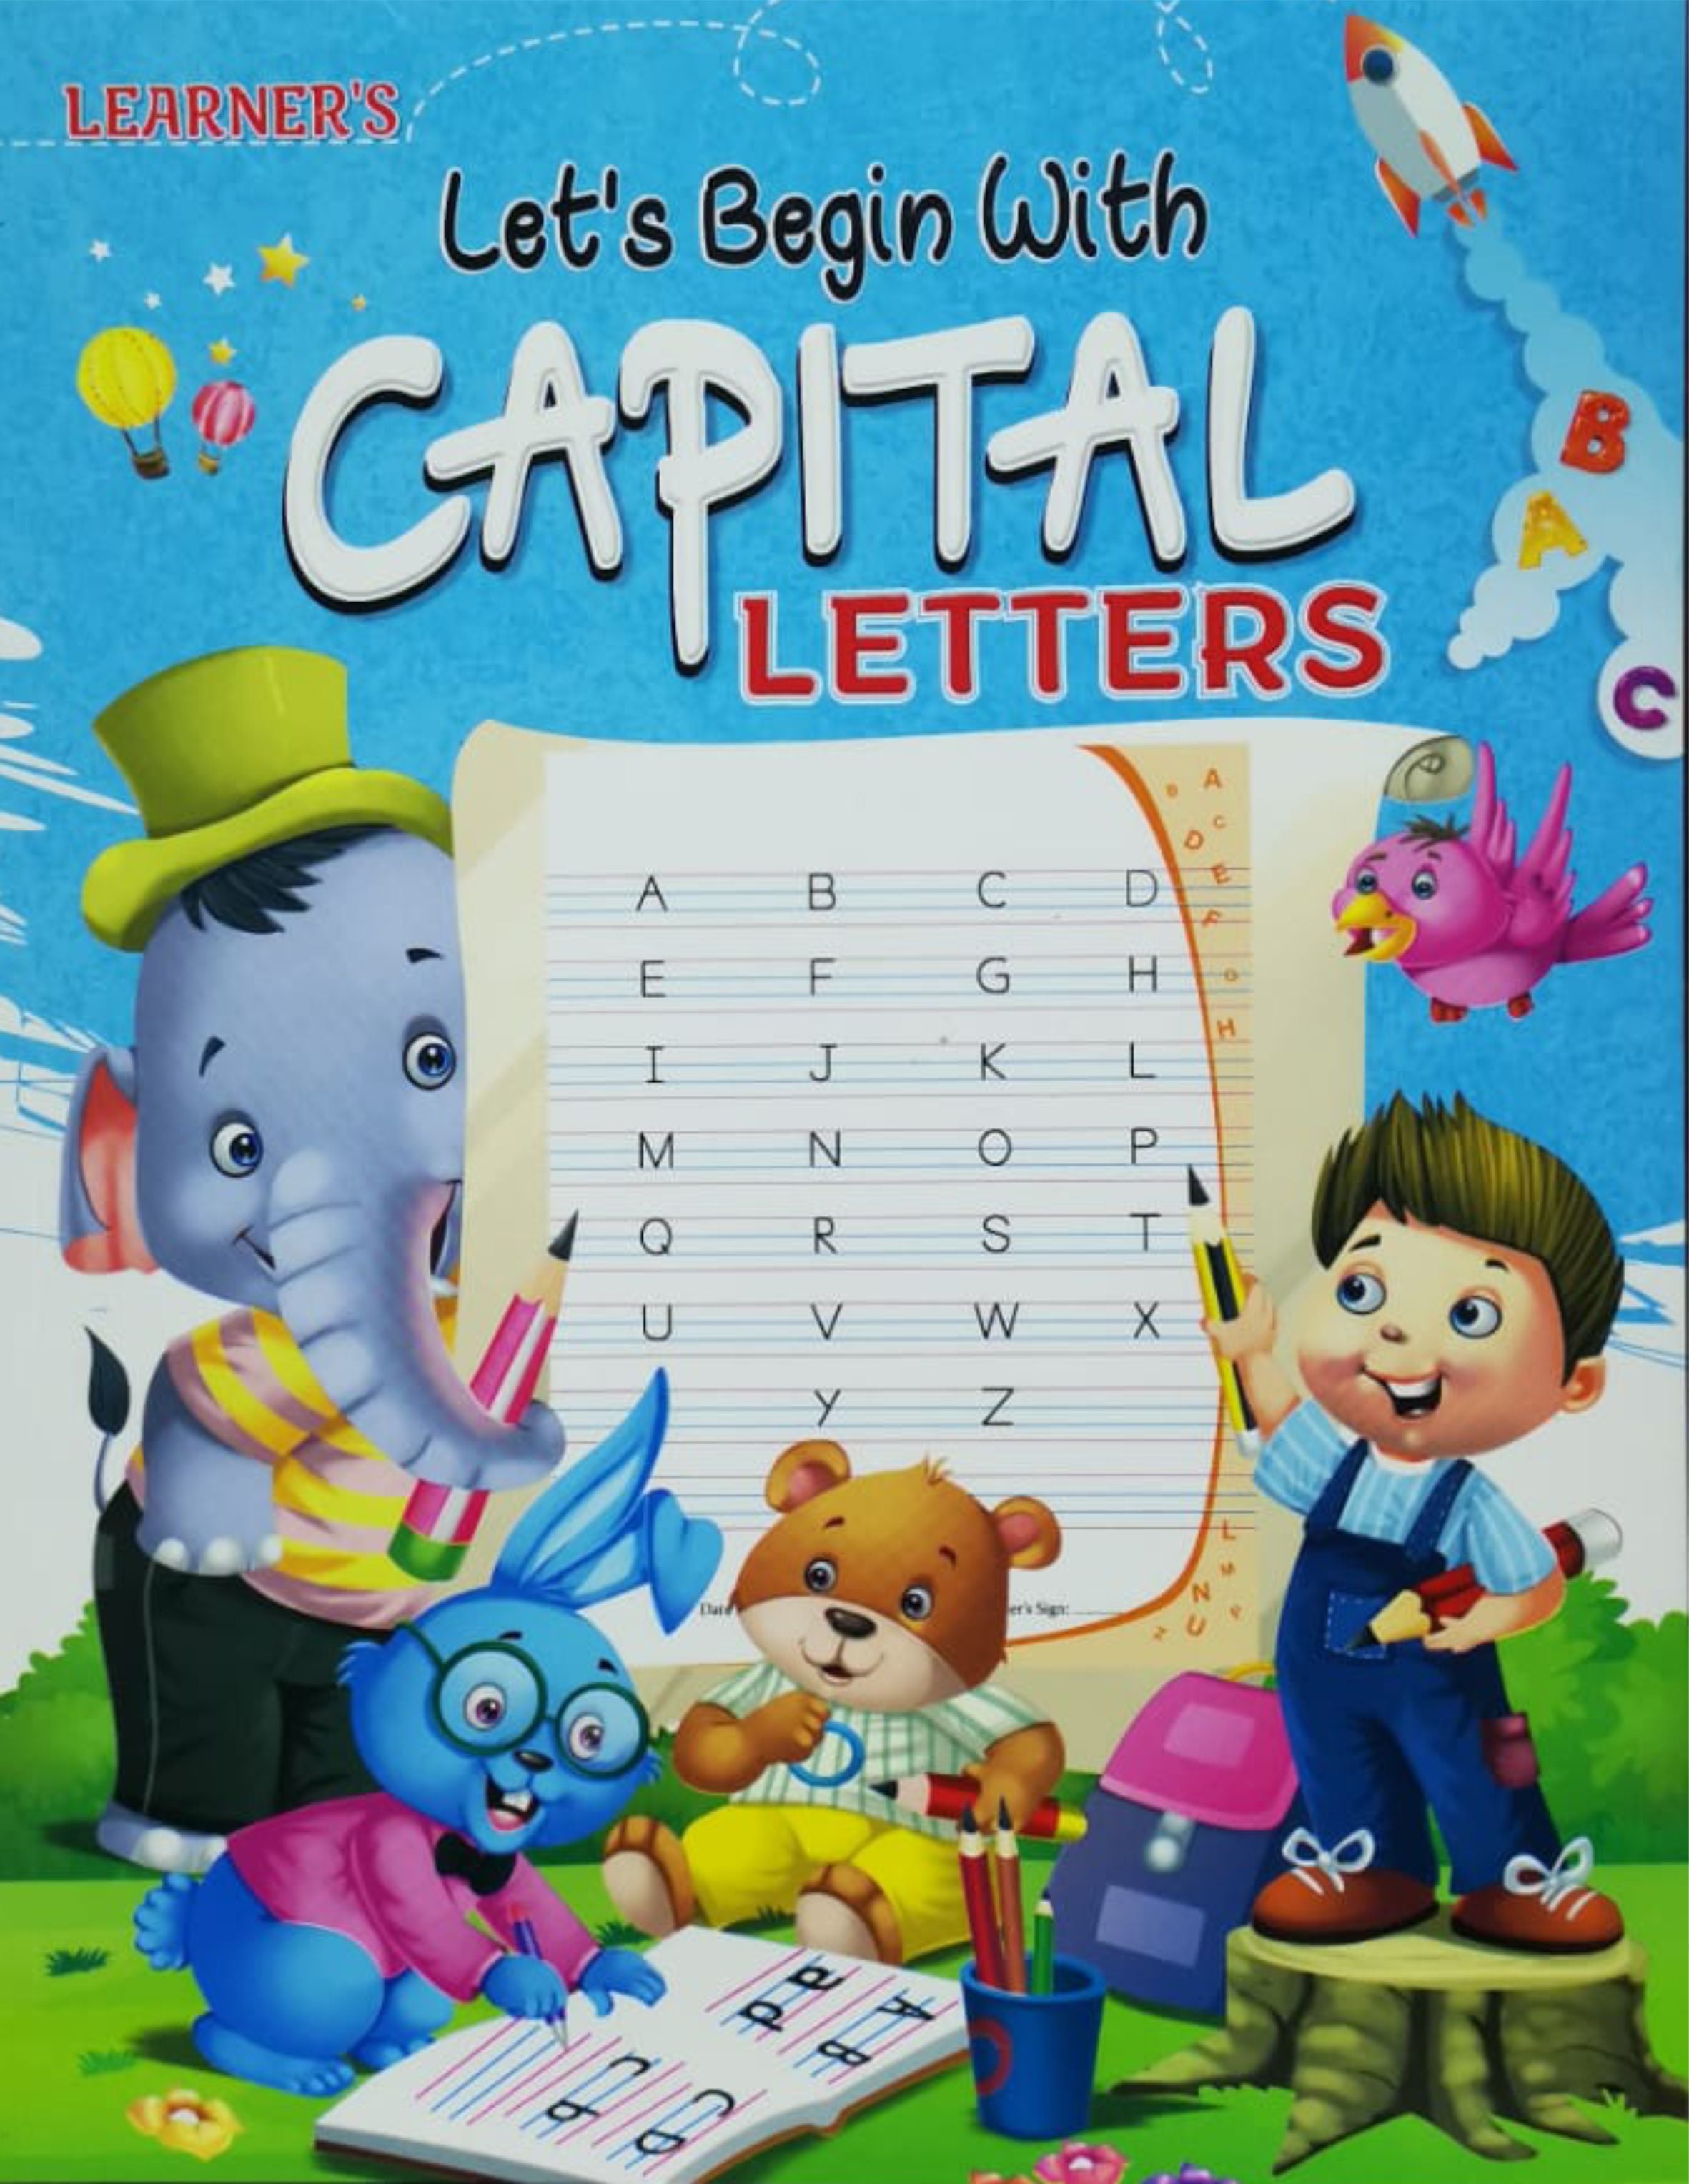 Let's Begin With Capital Letters (ABC)